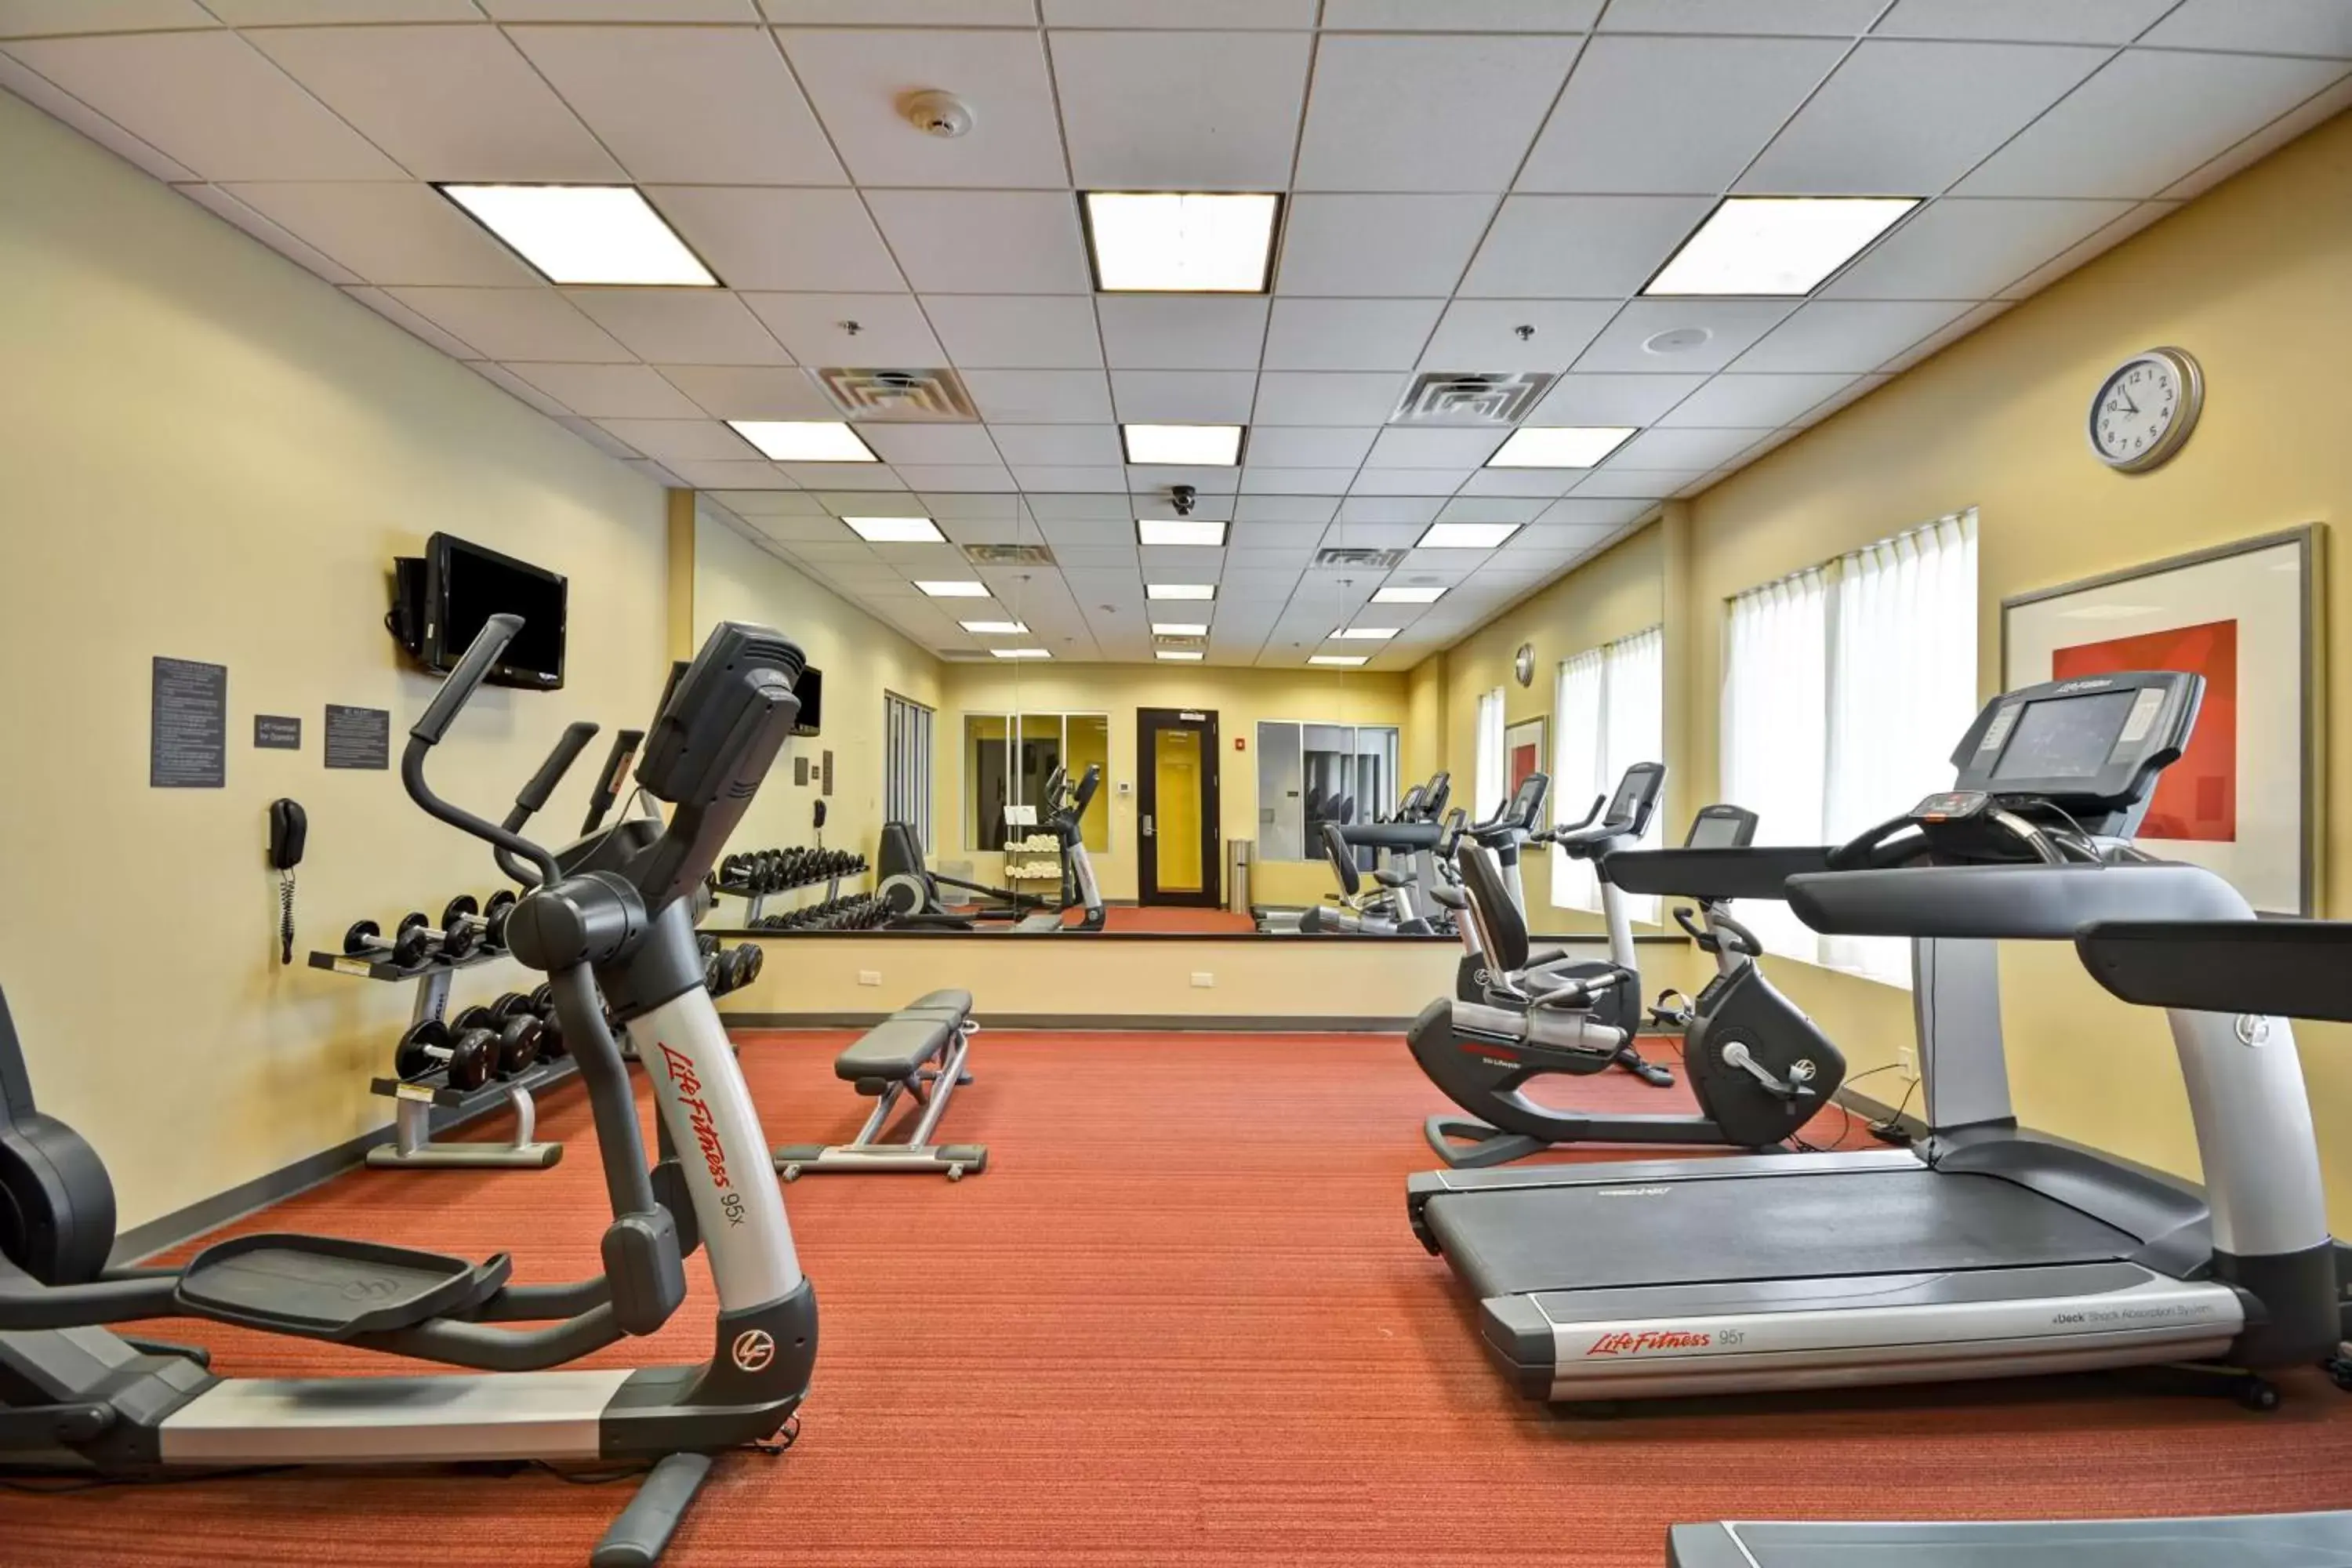 Fitness centre/facilities, Fitness Center/Facilities in Hyatt Place Chicago/Naperville/Warrenville